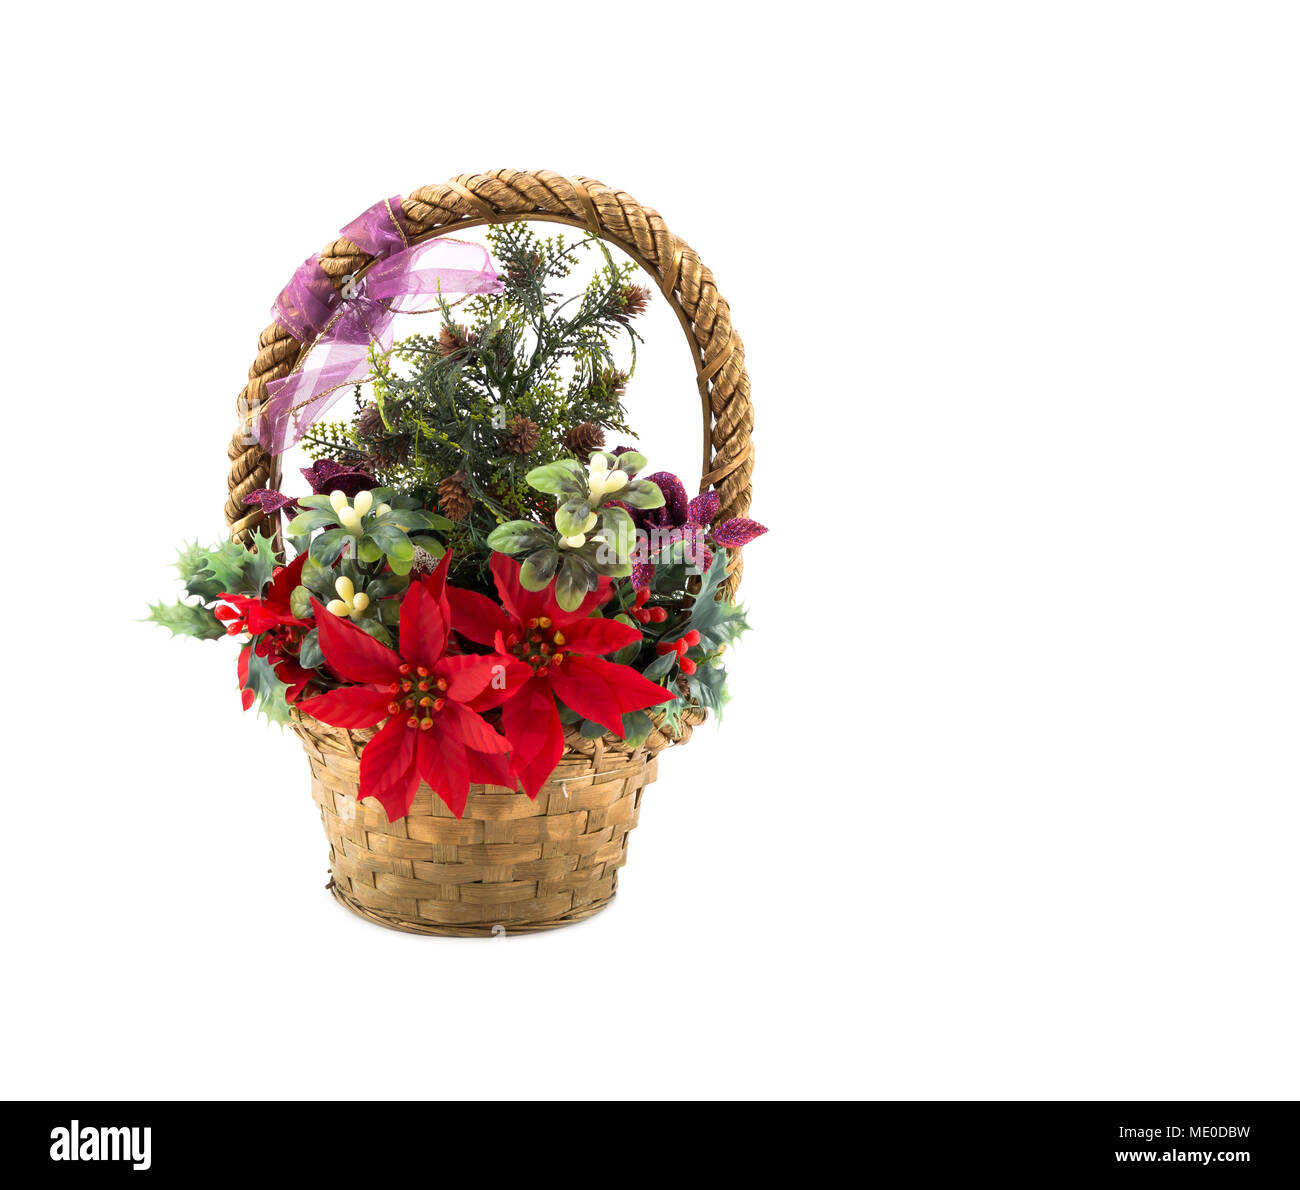 Christmas themed decorated wicker basket isolated on white Stock Photo